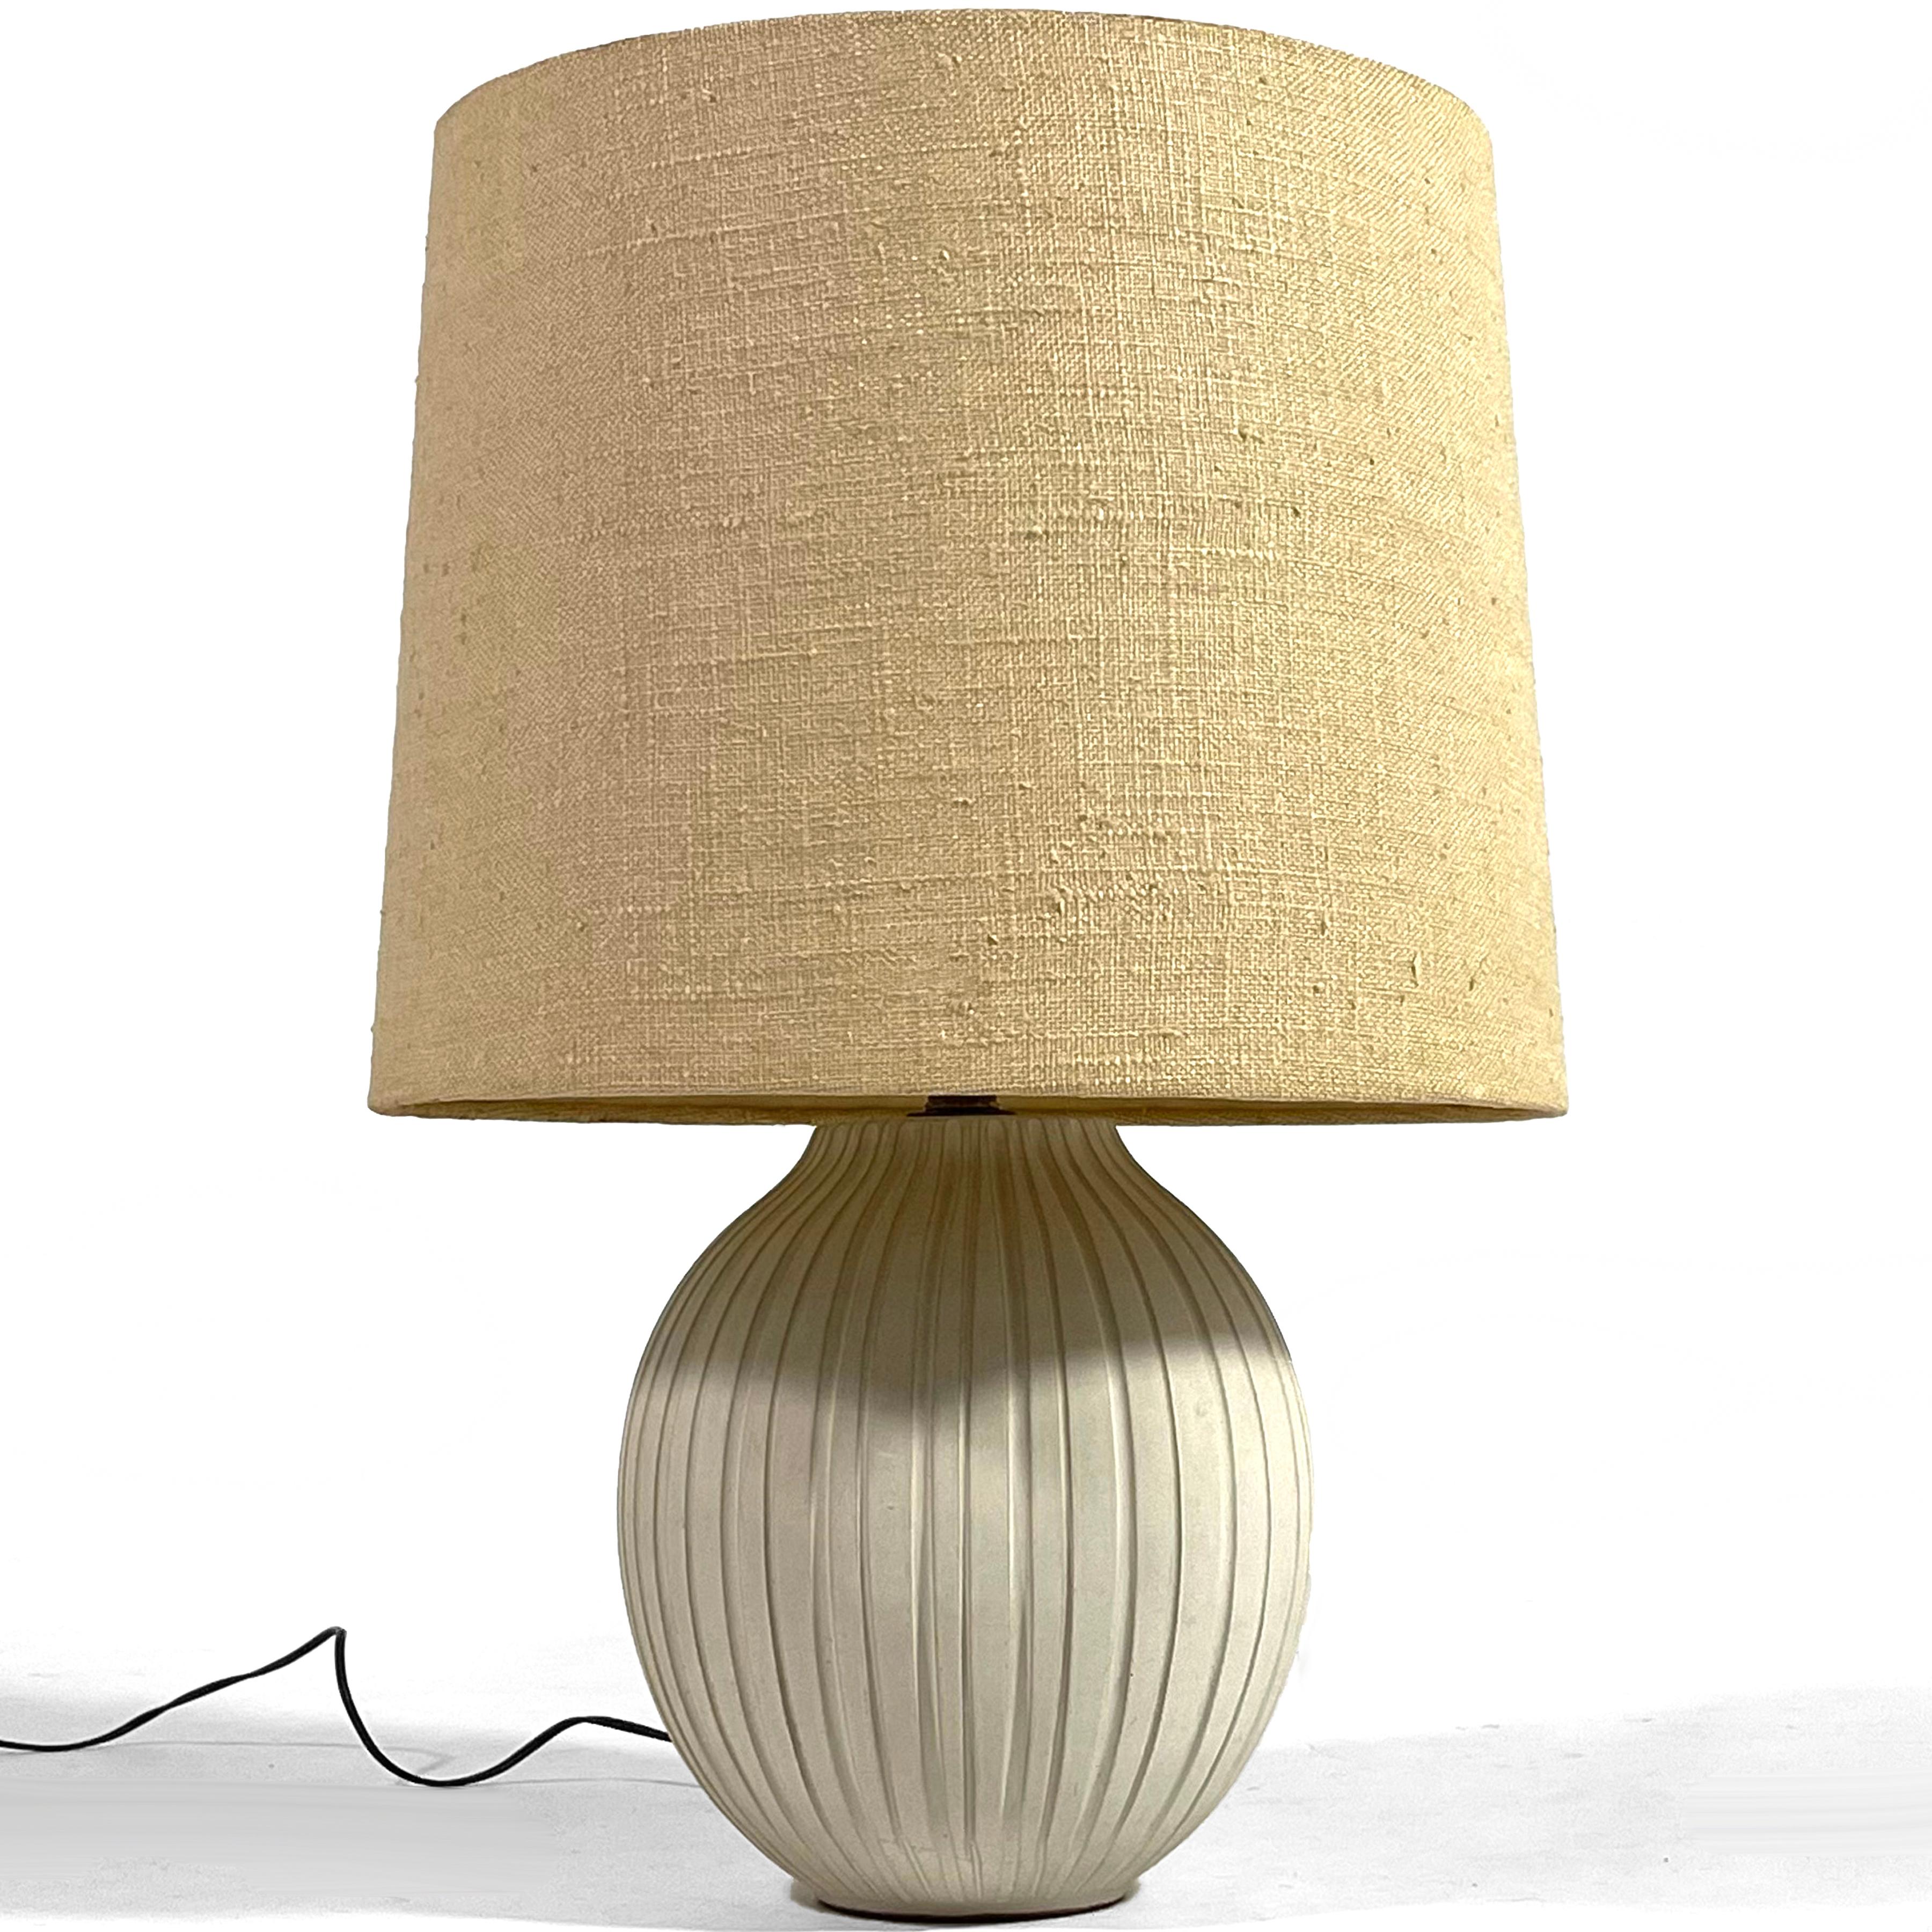 This exceptional table lamp has a hand made ceramic base in an onion shape with vertical incised lines. The original shade has a nubby linen texture, is perfectly proportioned and in very good original condition.